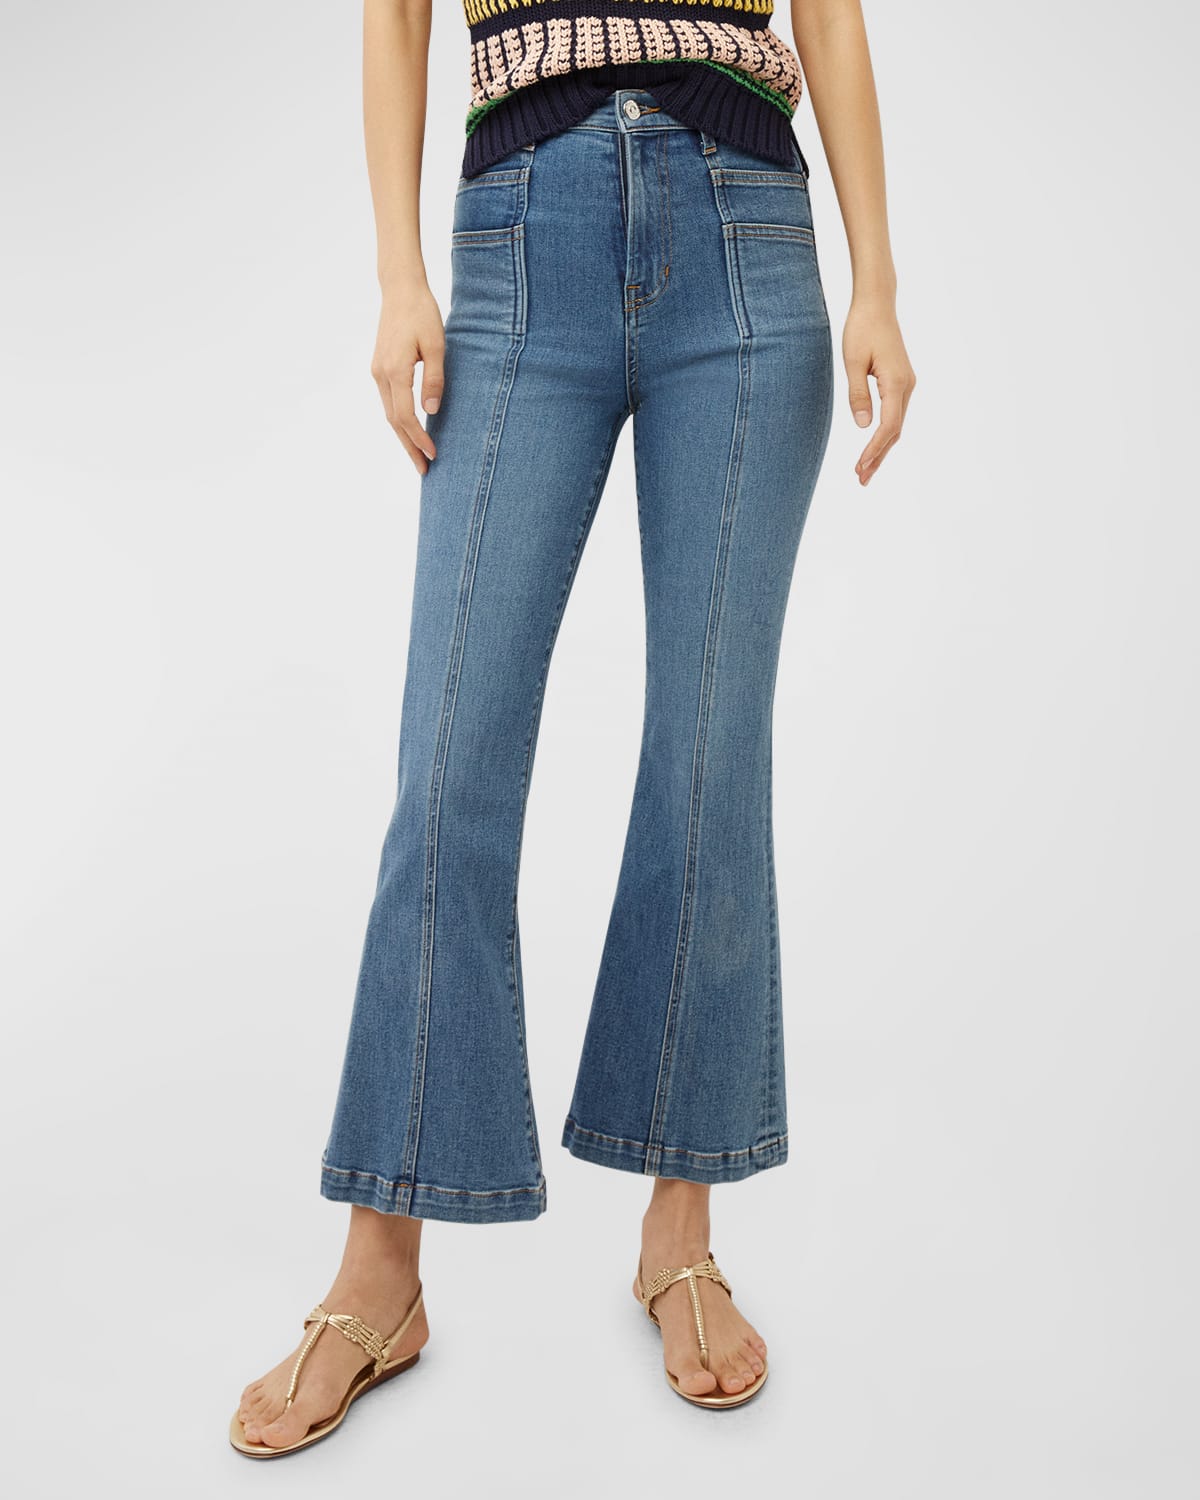 Veronica Beard Jeans Carson High-Rise Ankle Flare Jeans | Neiman Marcus